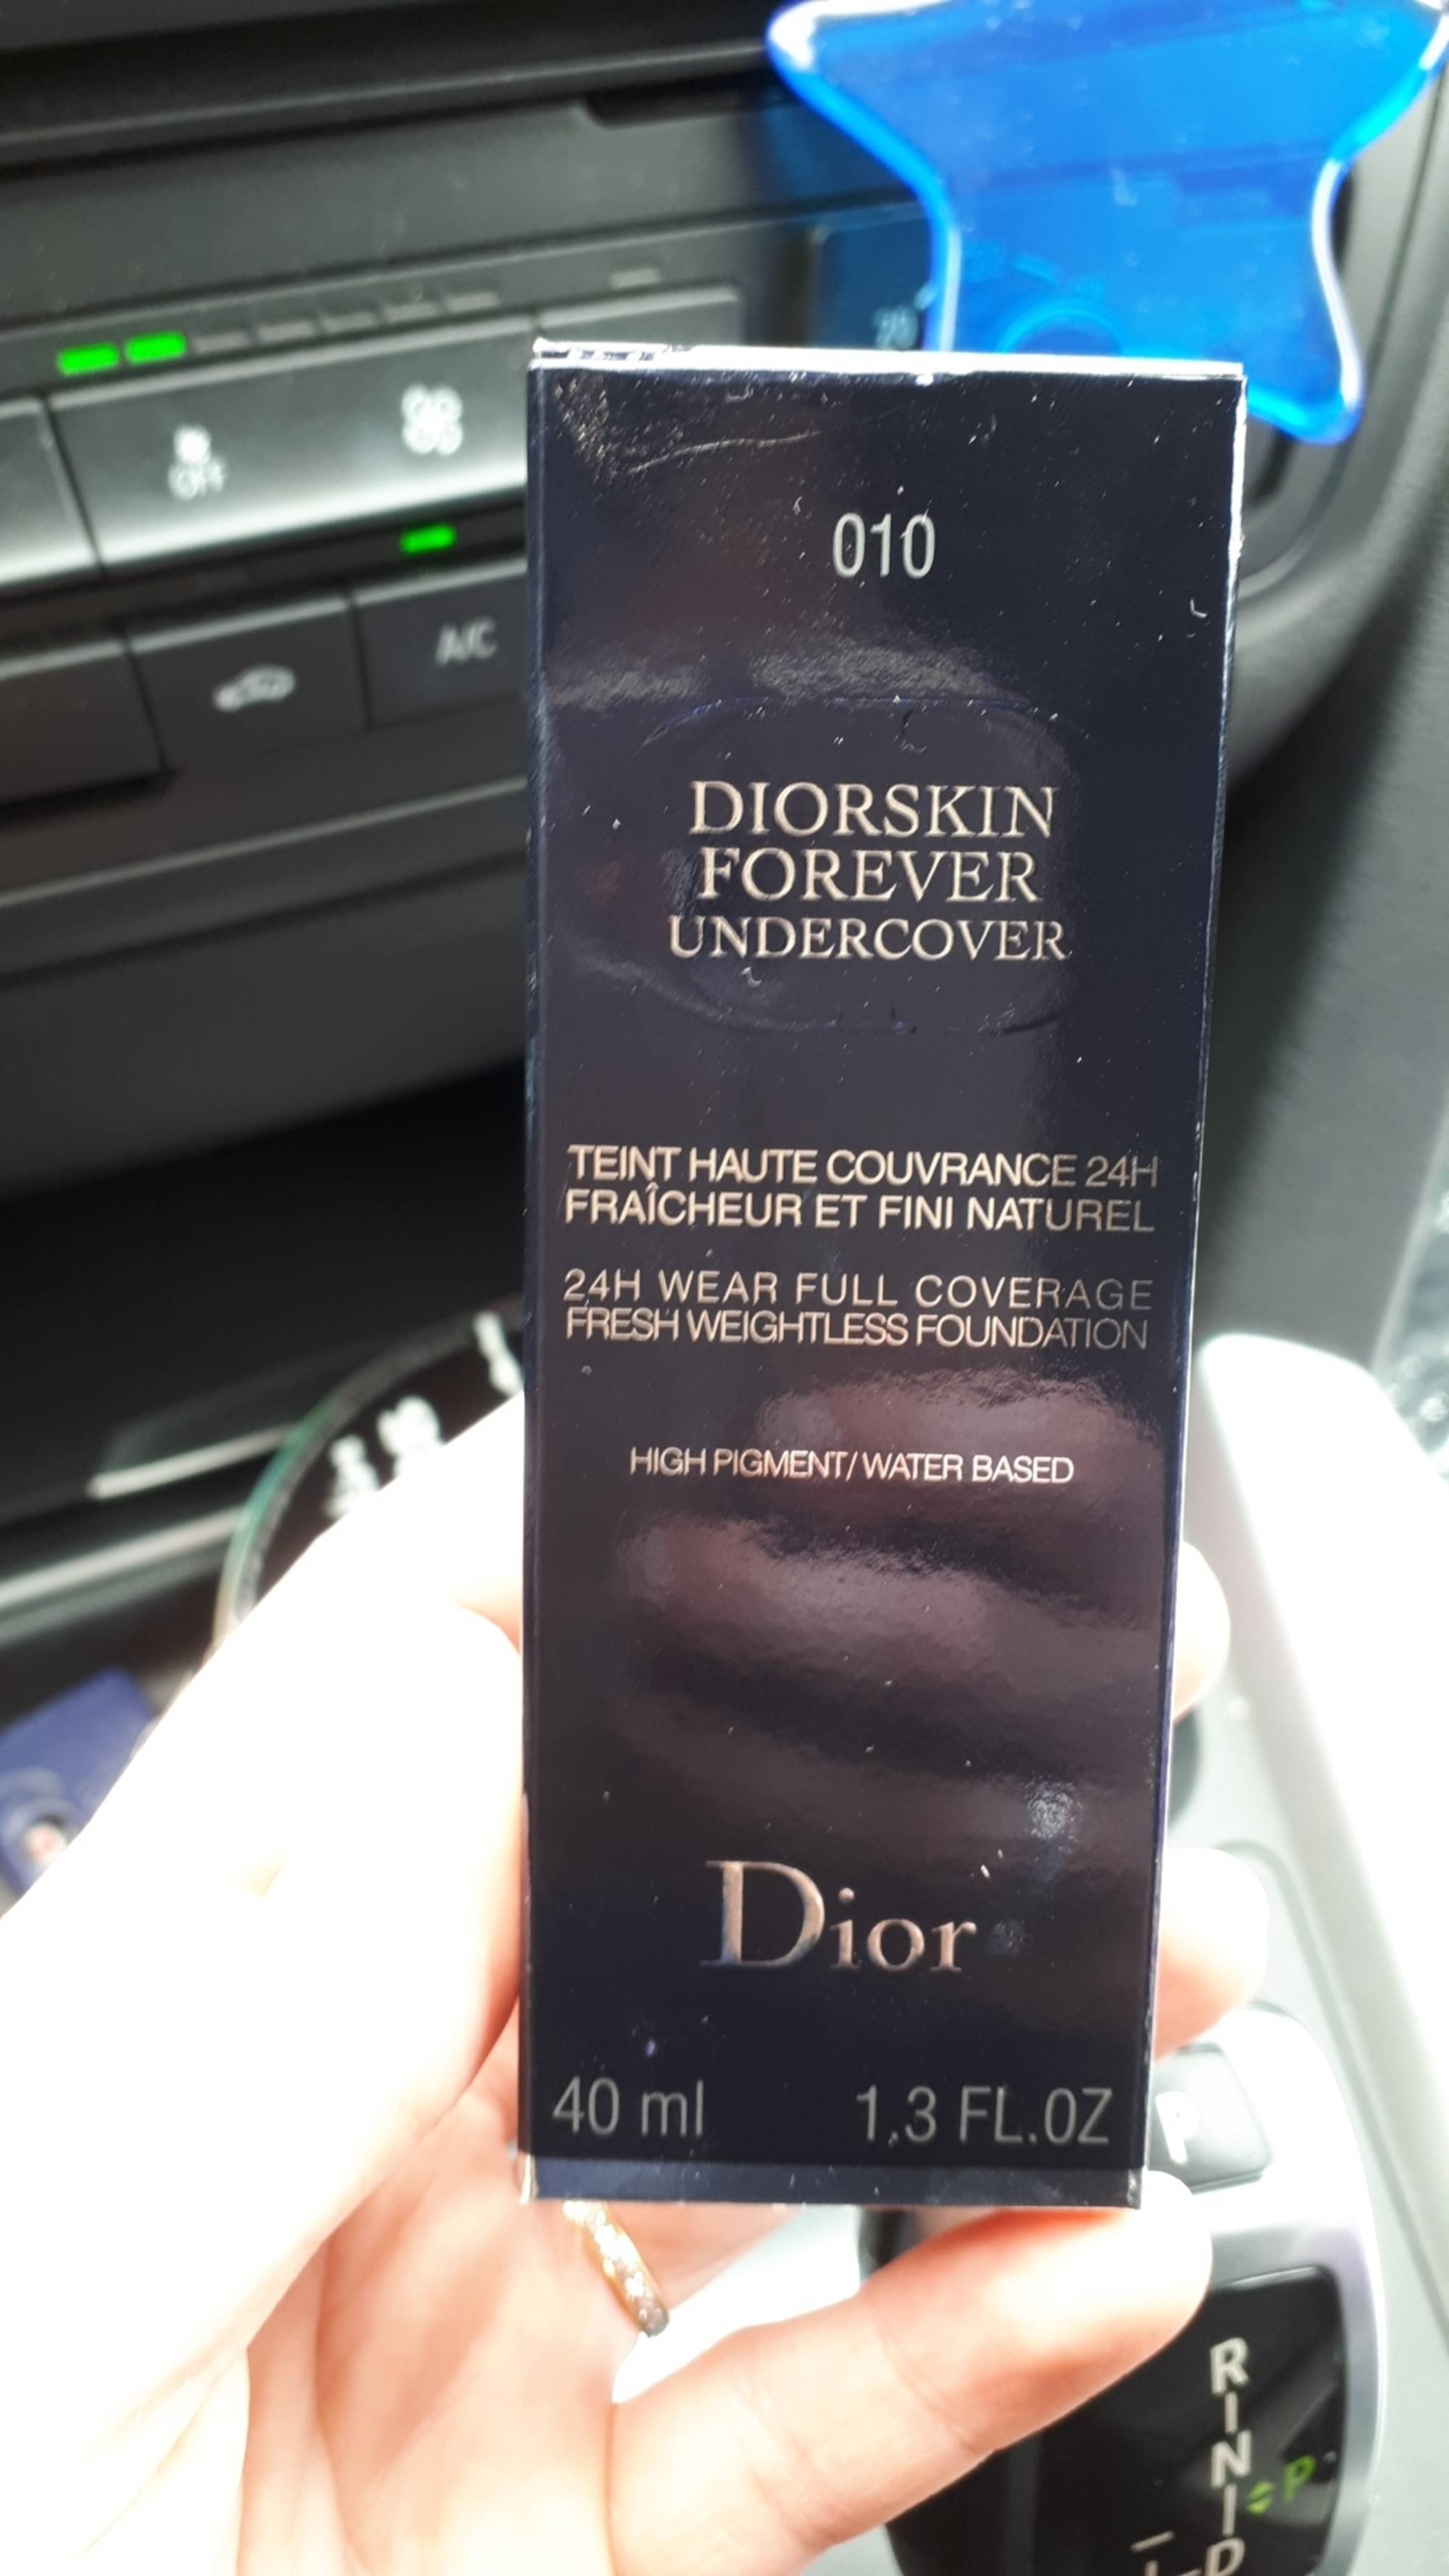 DIOR - Diorskin forever undercover - Teint haute couvrance 24h 